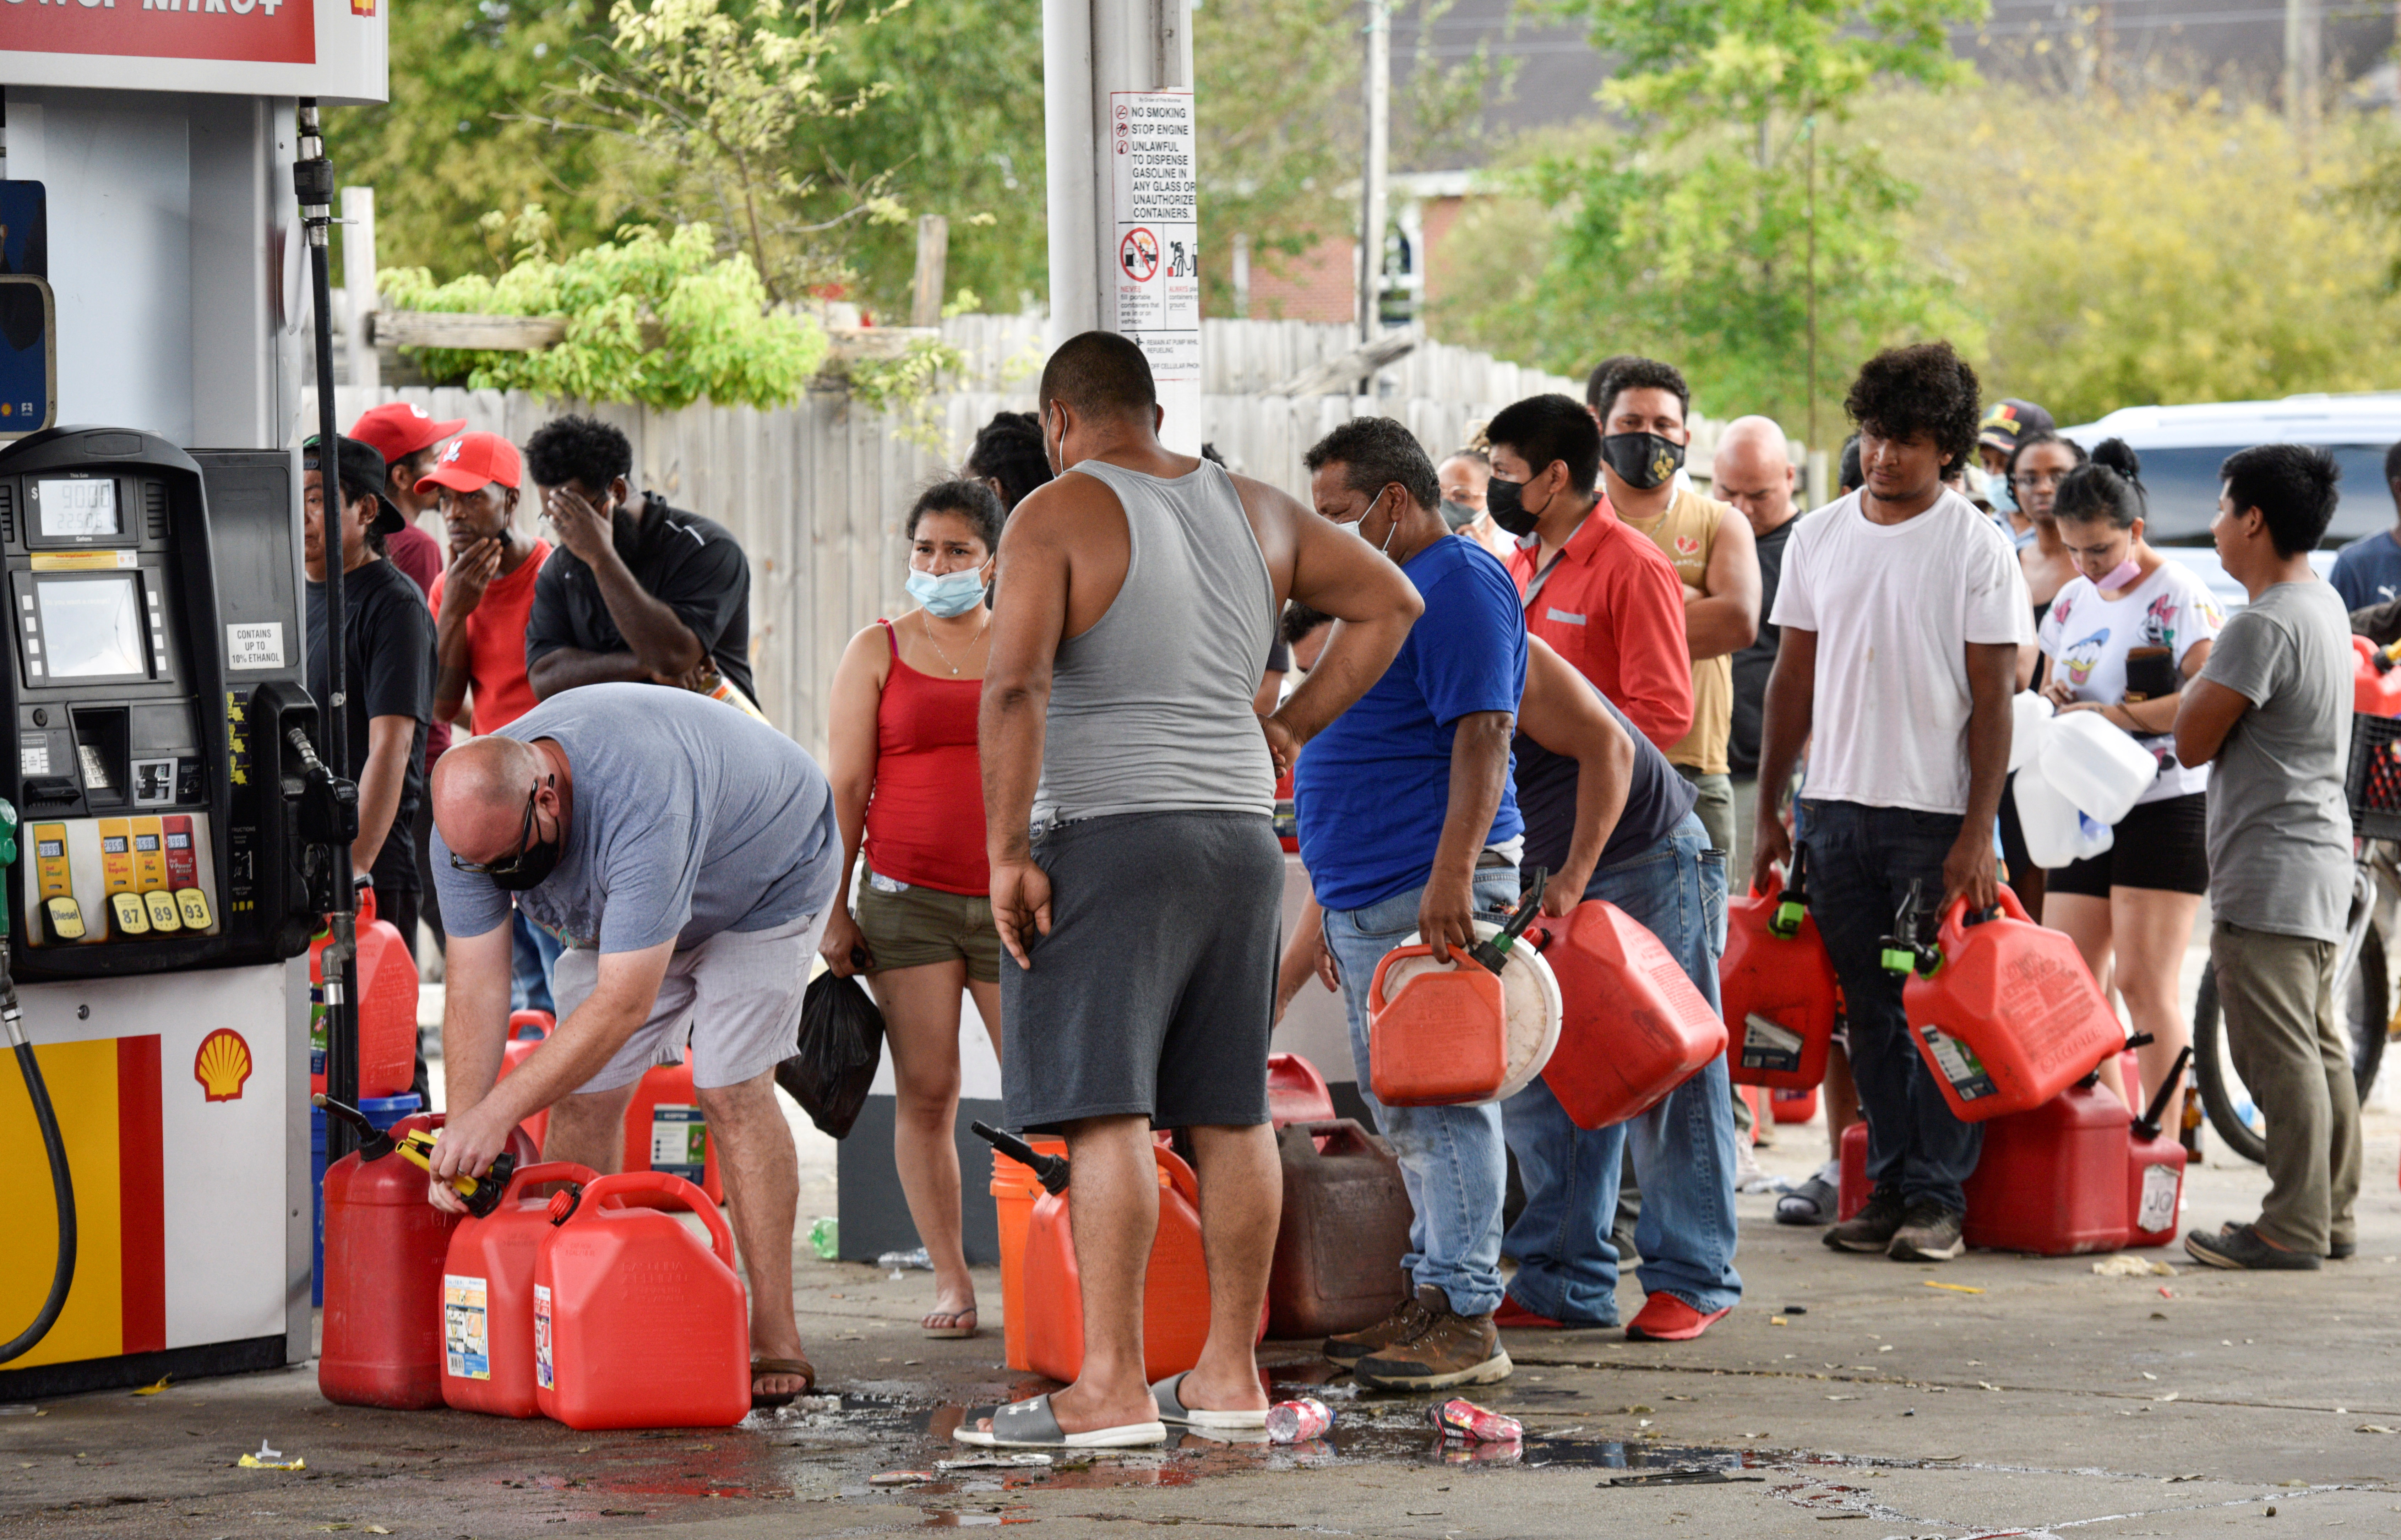 Three days after Hurricane Ida knocked out power throughout the city, residents wait in long lines at a neighborhood gas station to fill fuel containers for cash only sales in New Orleans